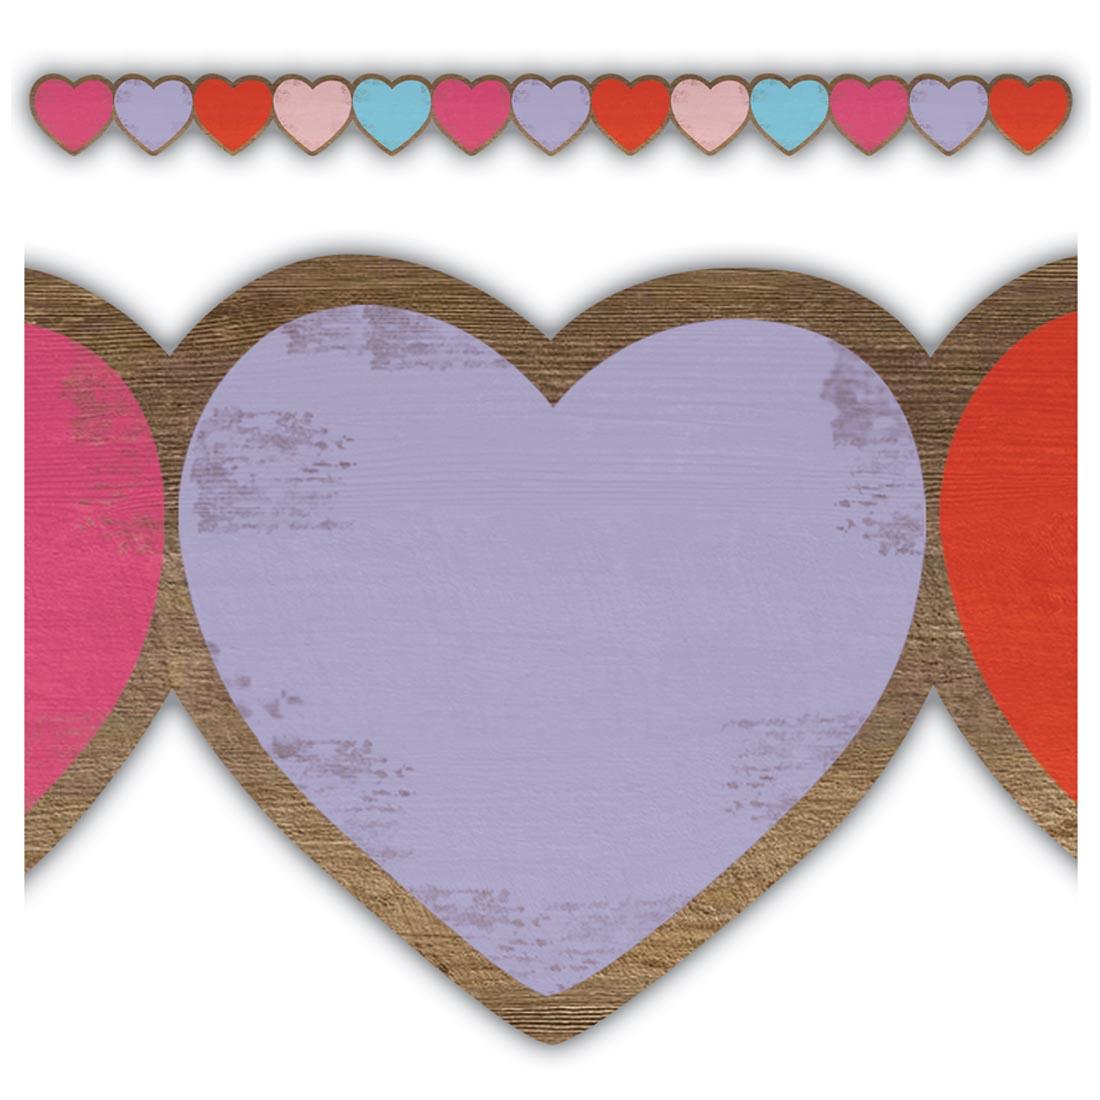 Full view and closeup of the Hearts Die Cut Border Trim from the Home Sweet Classroom collection by Teacher Created Resources